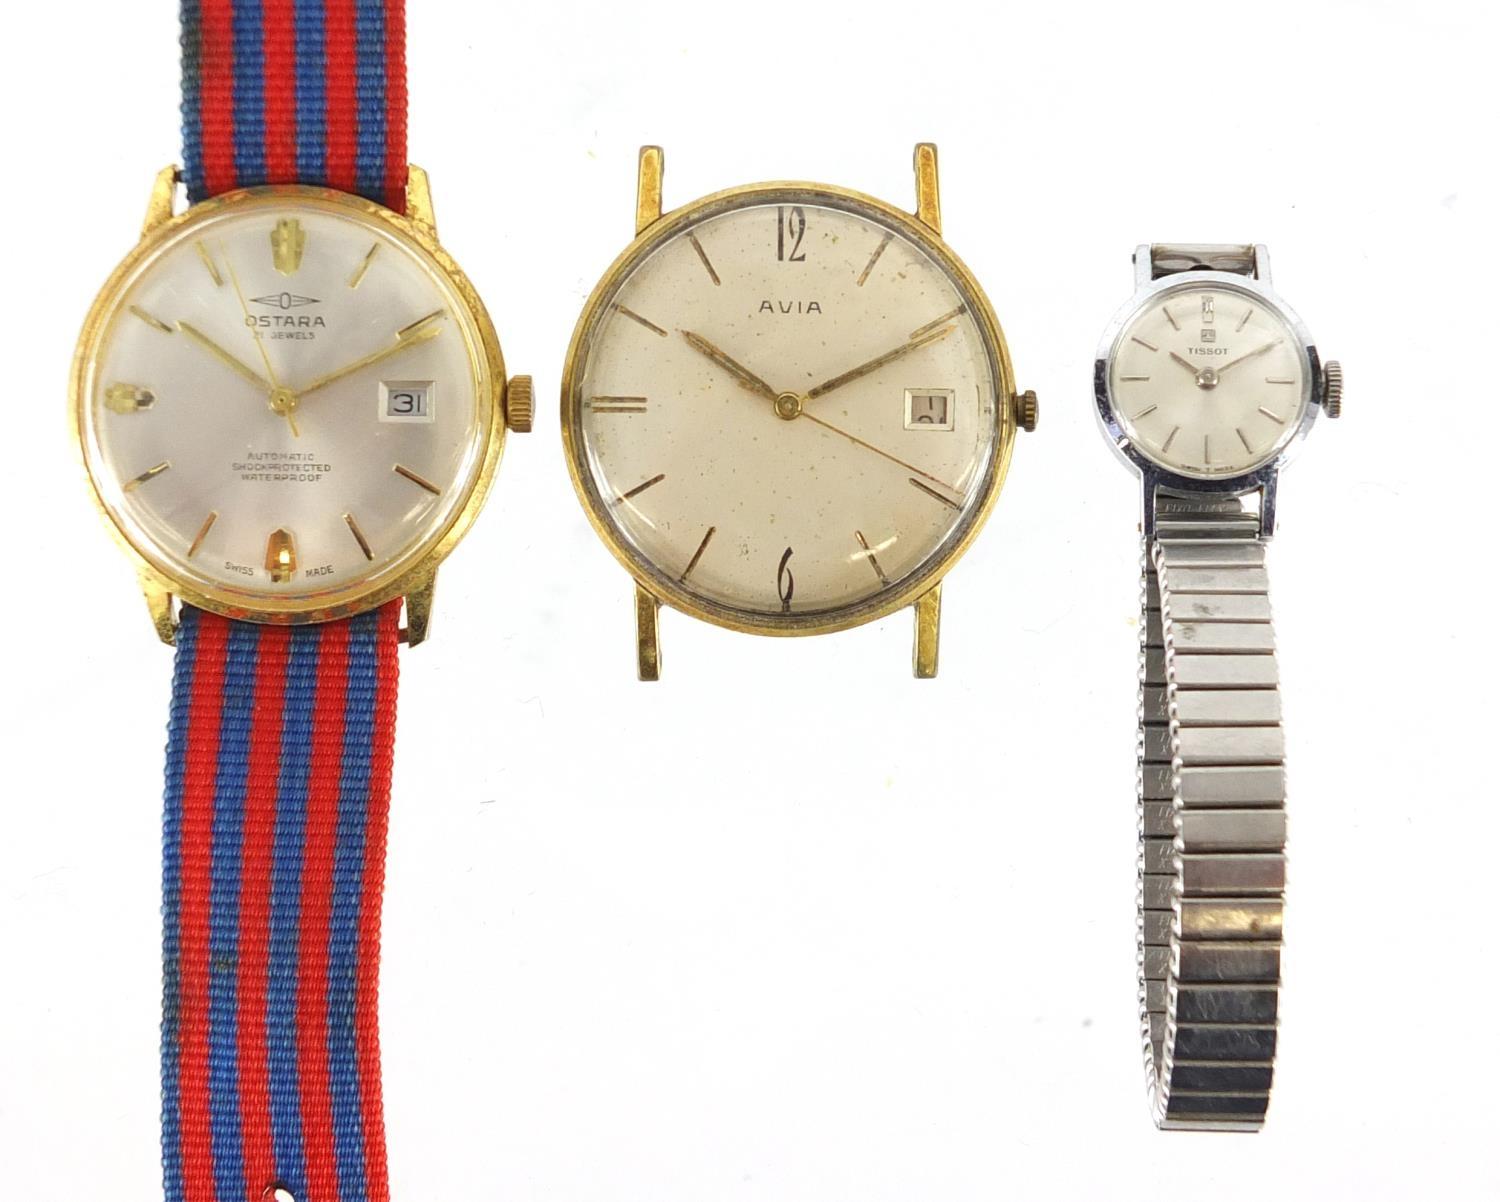 Three wristwatches comprising Ostara automatic, Avia and Tissot : For Extra Condition Reports Please